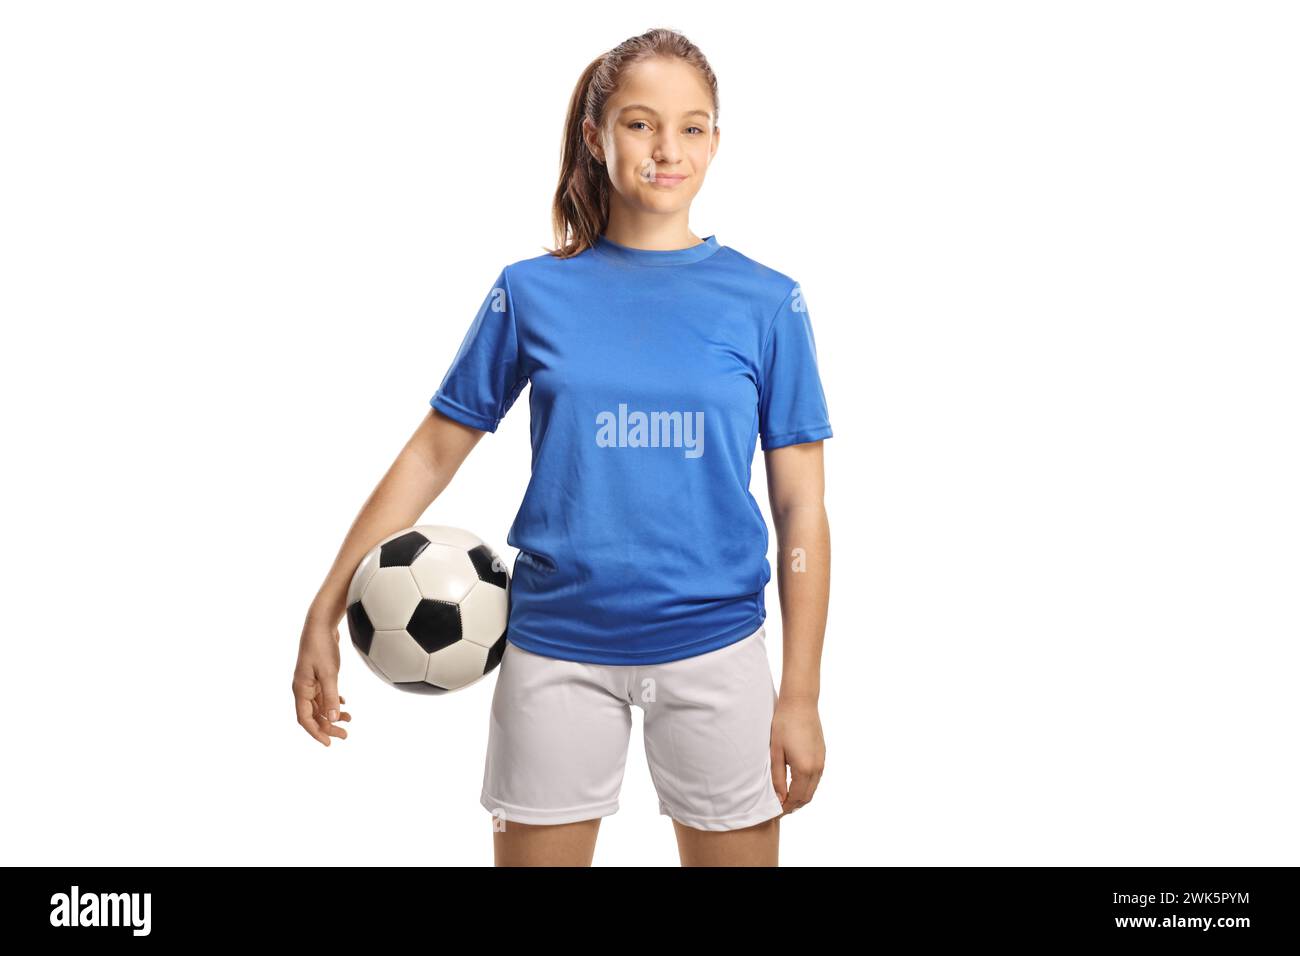 Teenage girl in a football jersey holding a ball isolated on white background Stock Photo